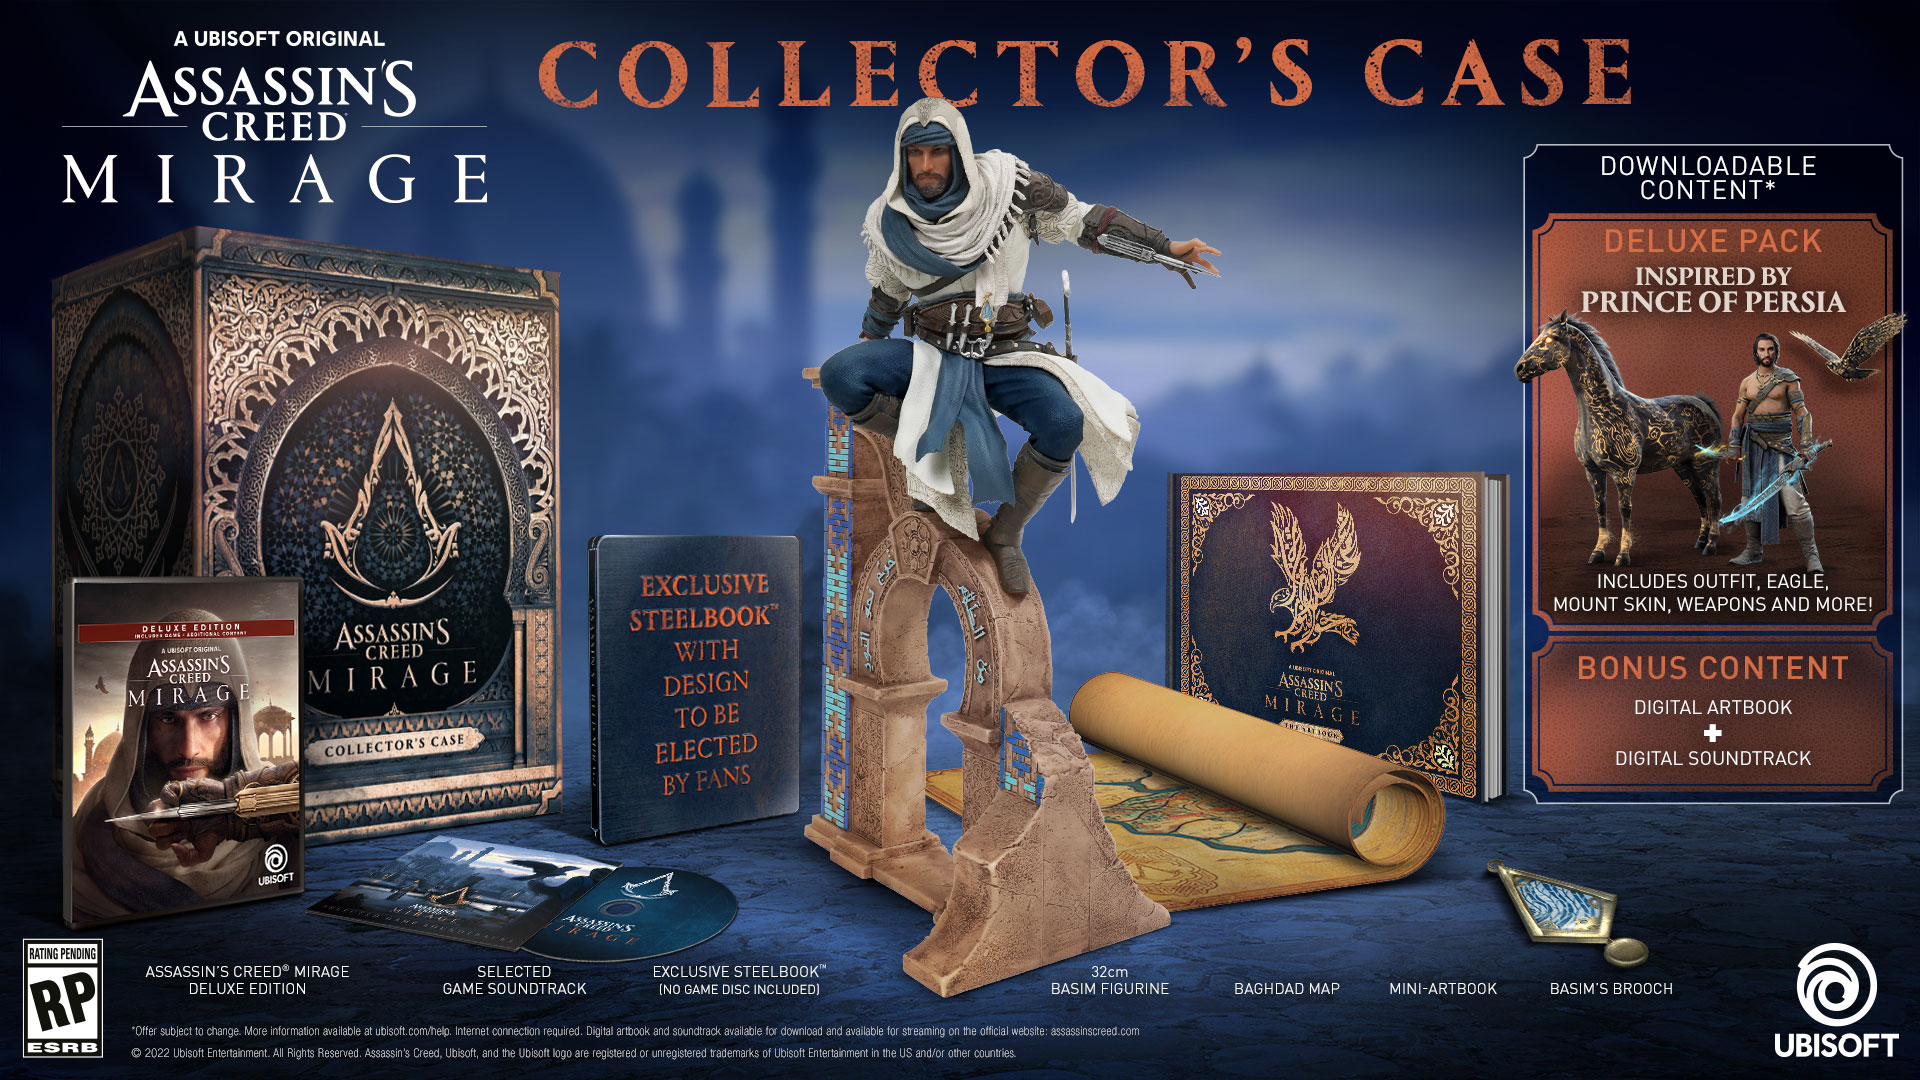 Assassin's Creed Mirage Collector's Case features a big Basim statue